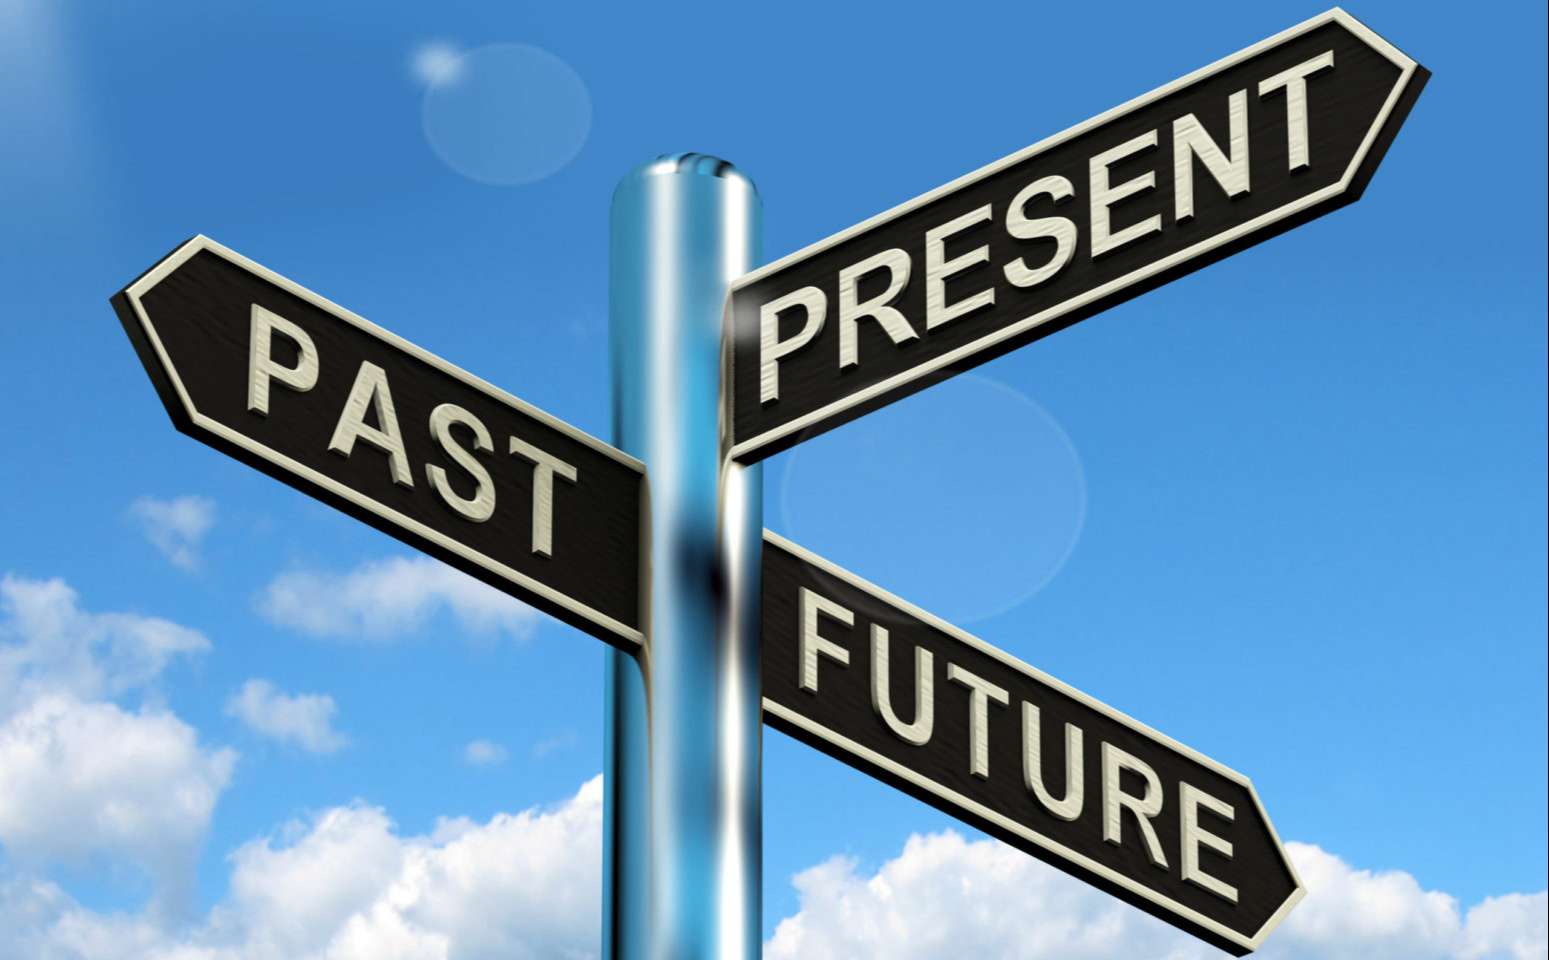 Past Present And Future Signpost Showing Evolution Destiny Or Aging